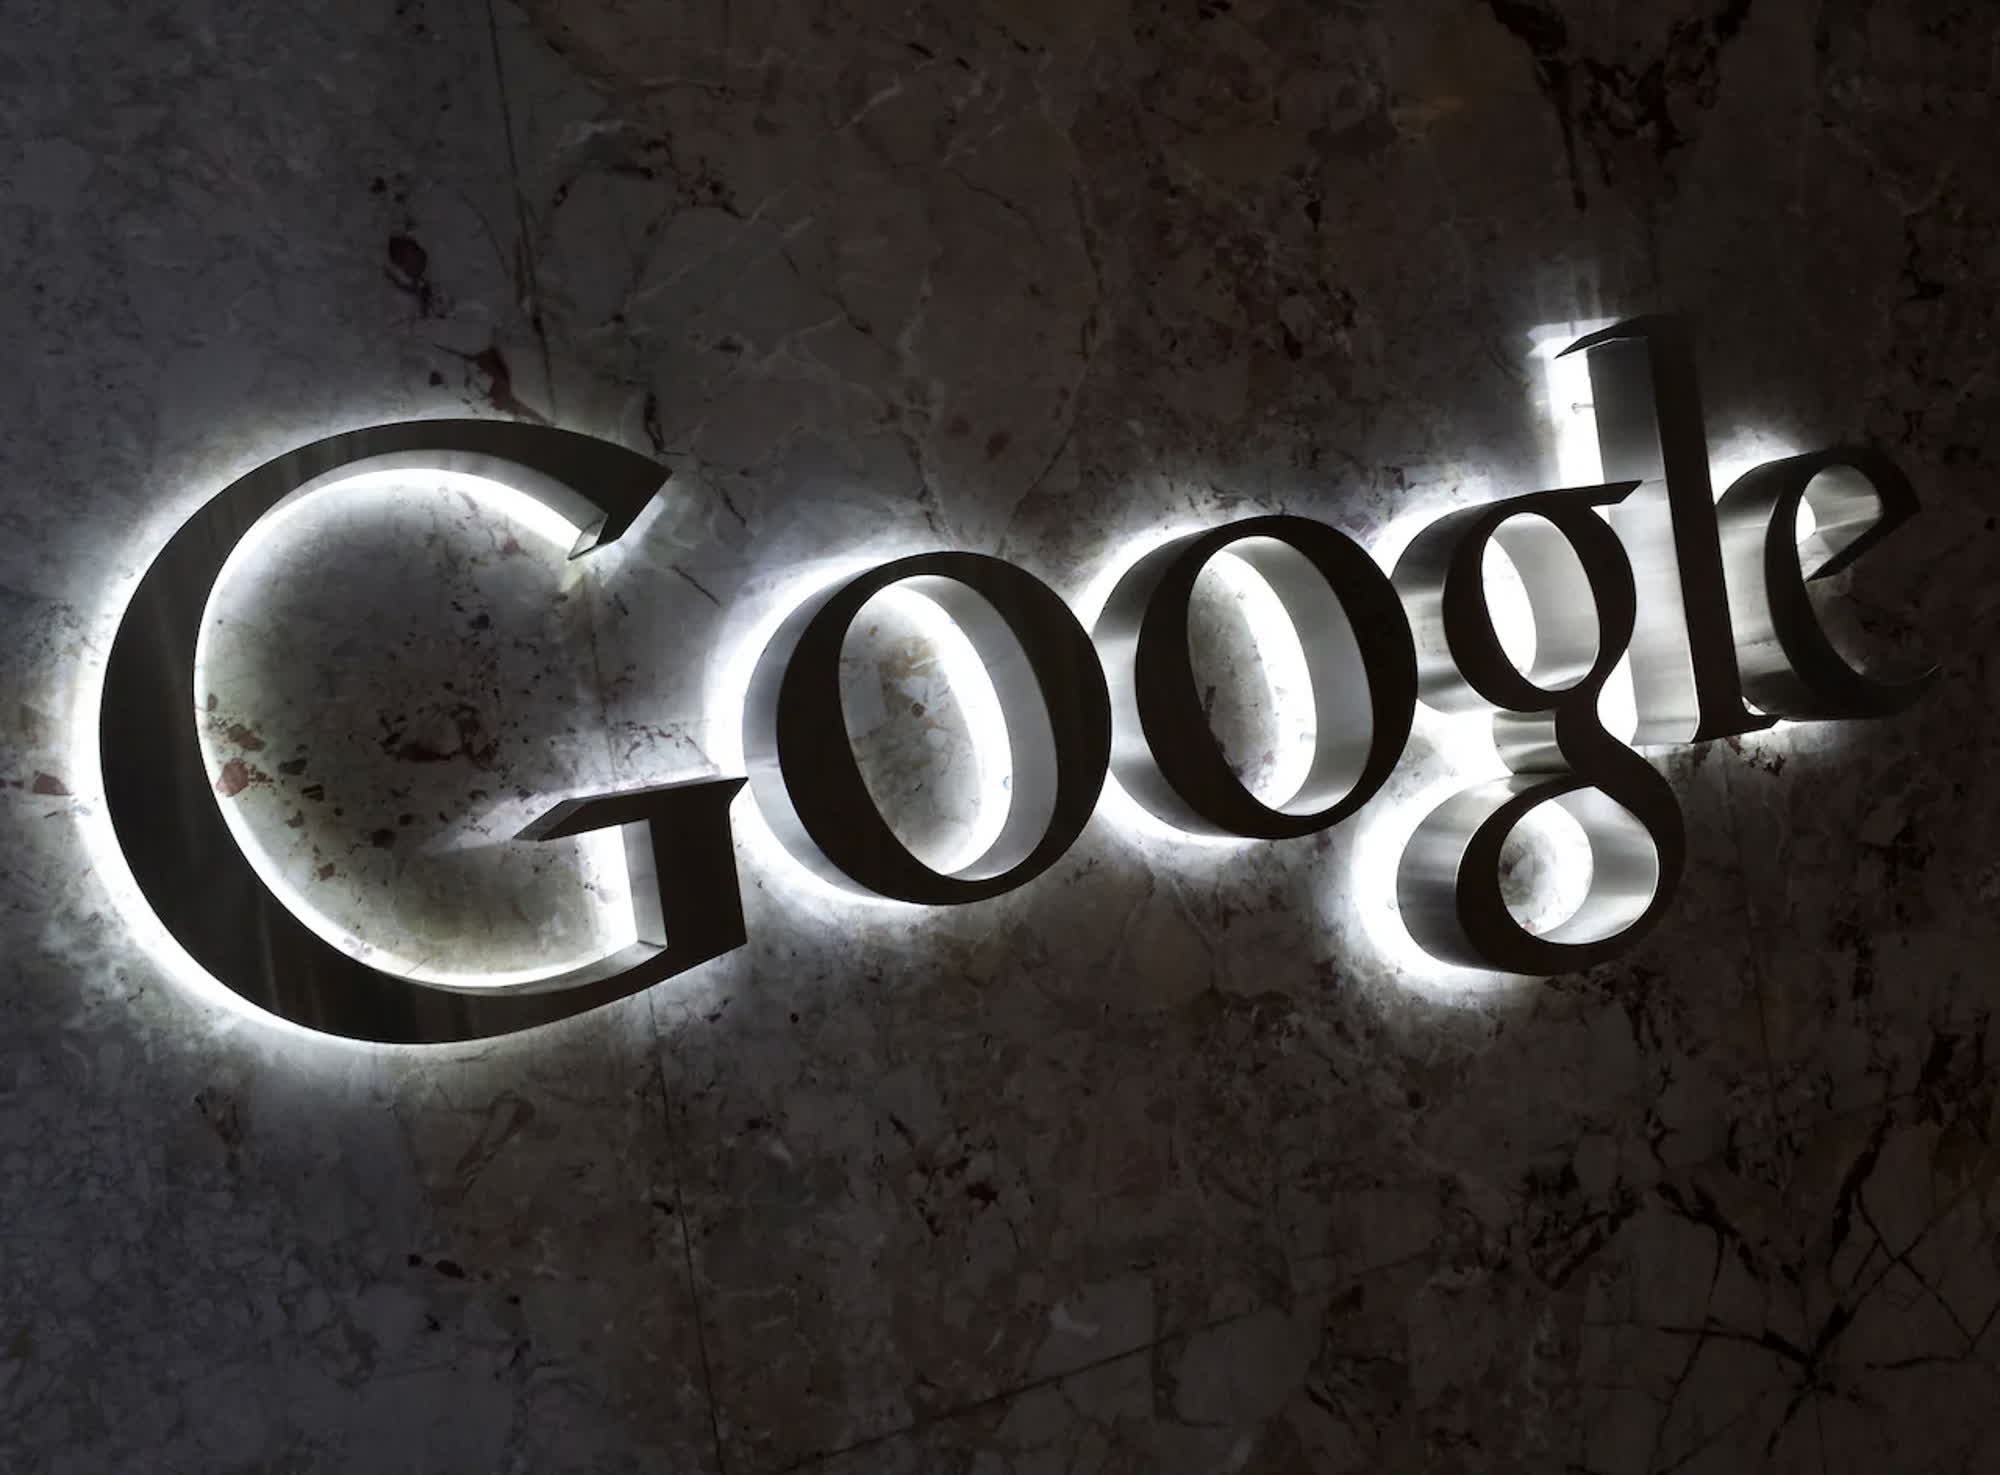 A single company asked Google to delist almost one billion pirate web pages in less than a year